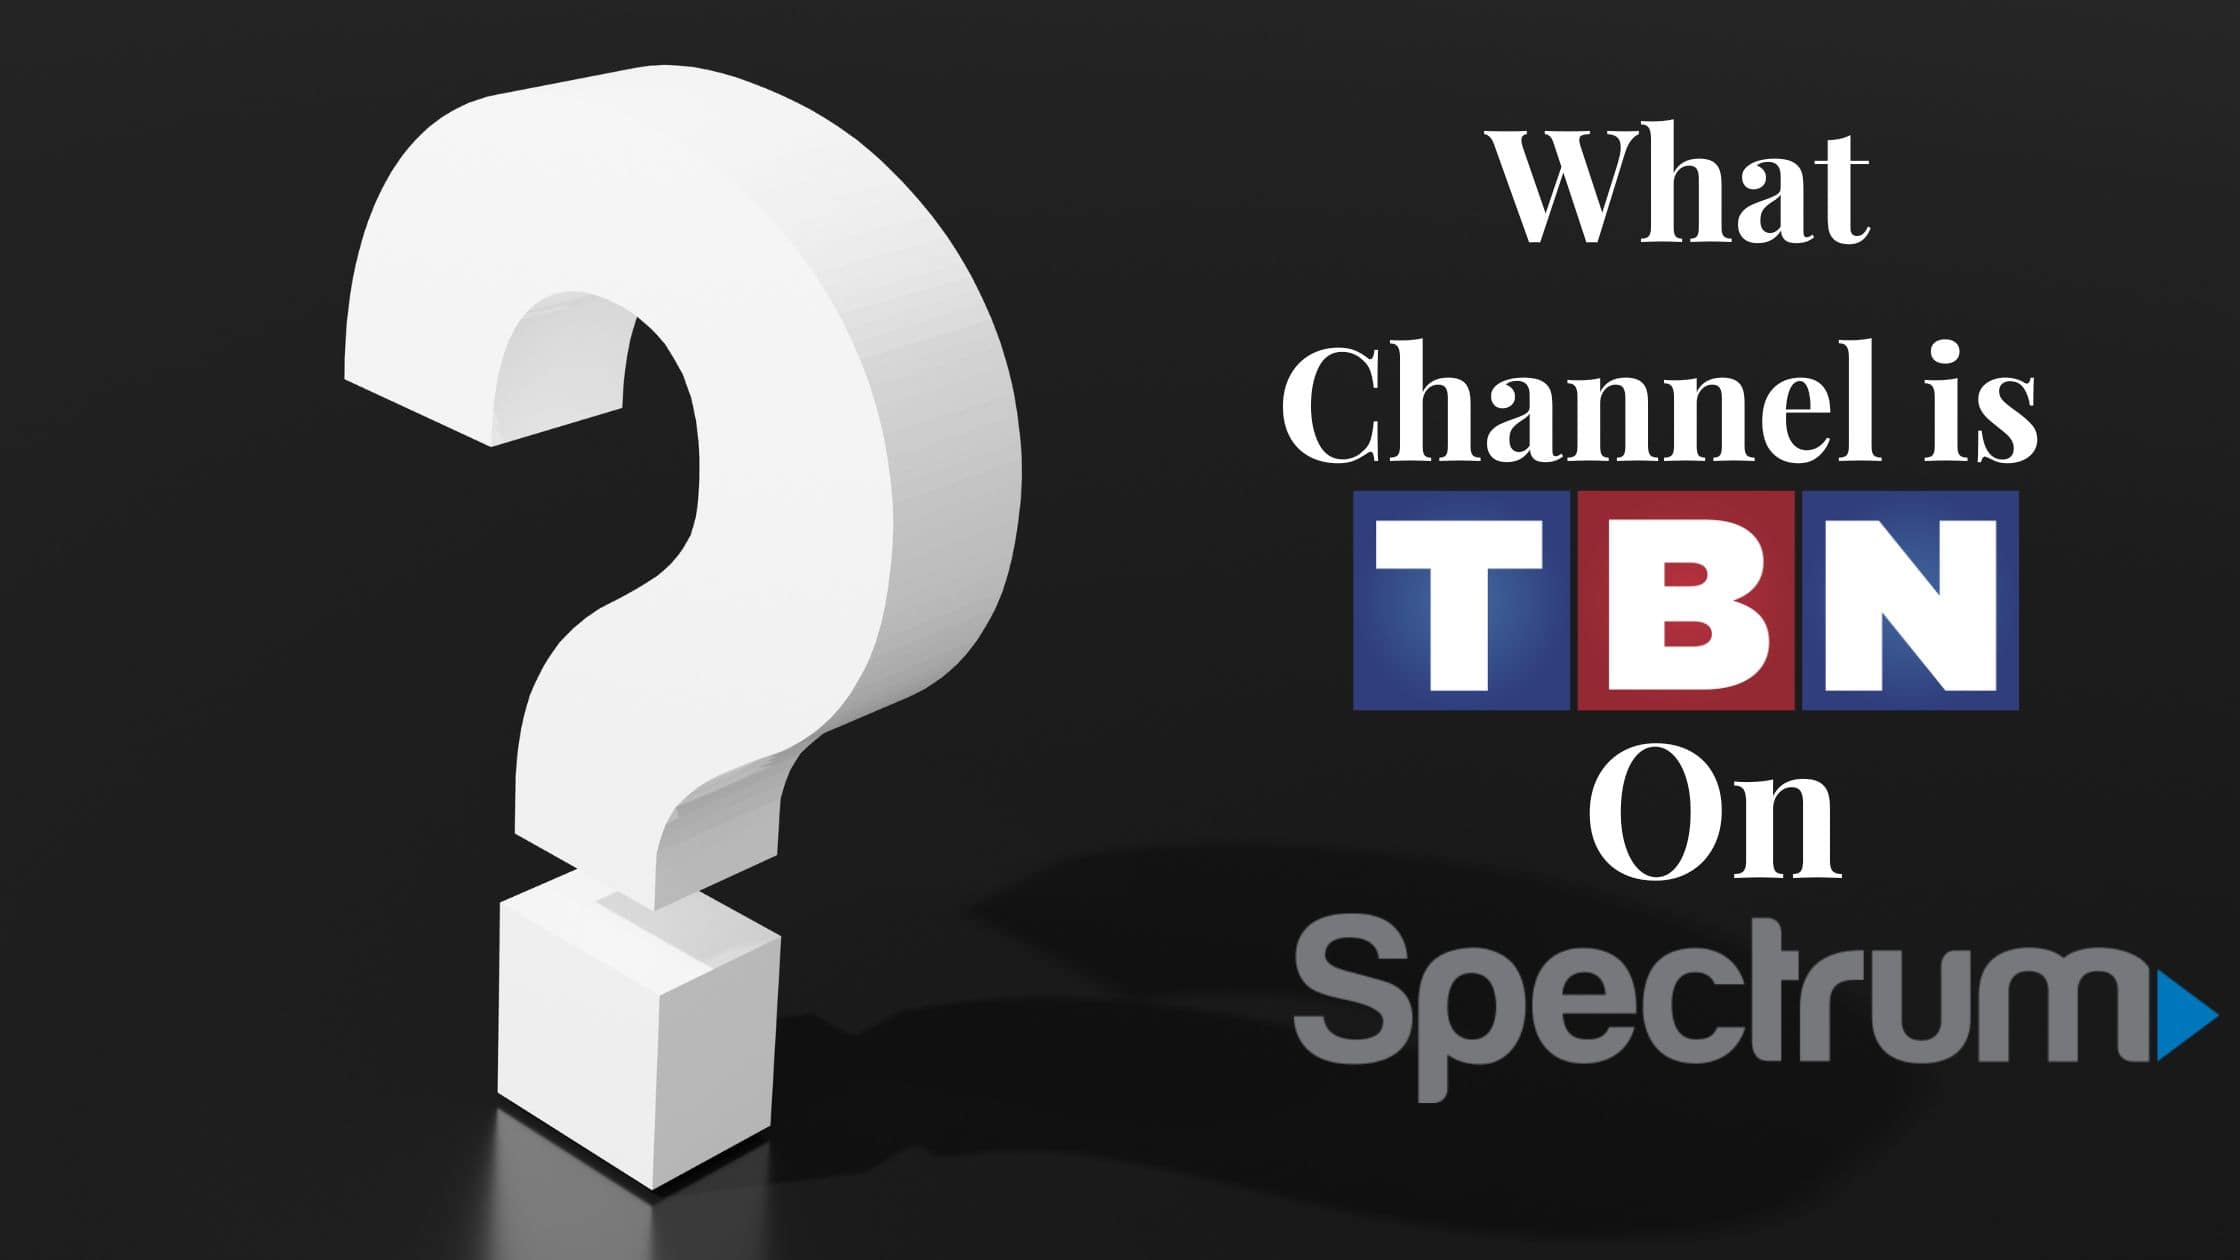 What Channel is TBN on Spectrum